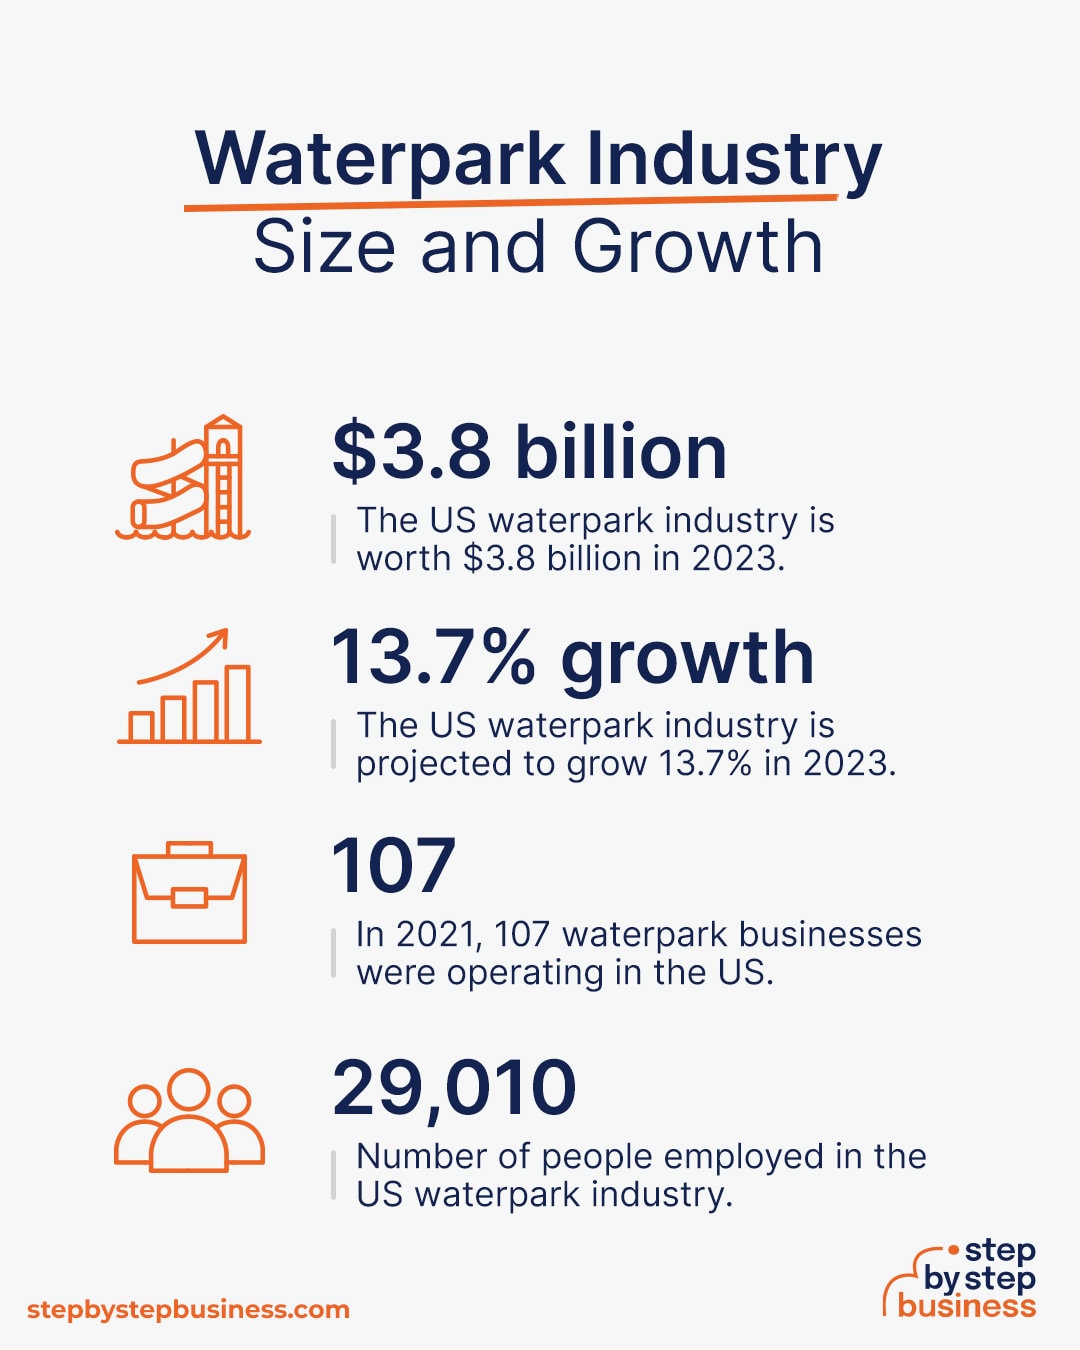 Waterpark industry size and growth